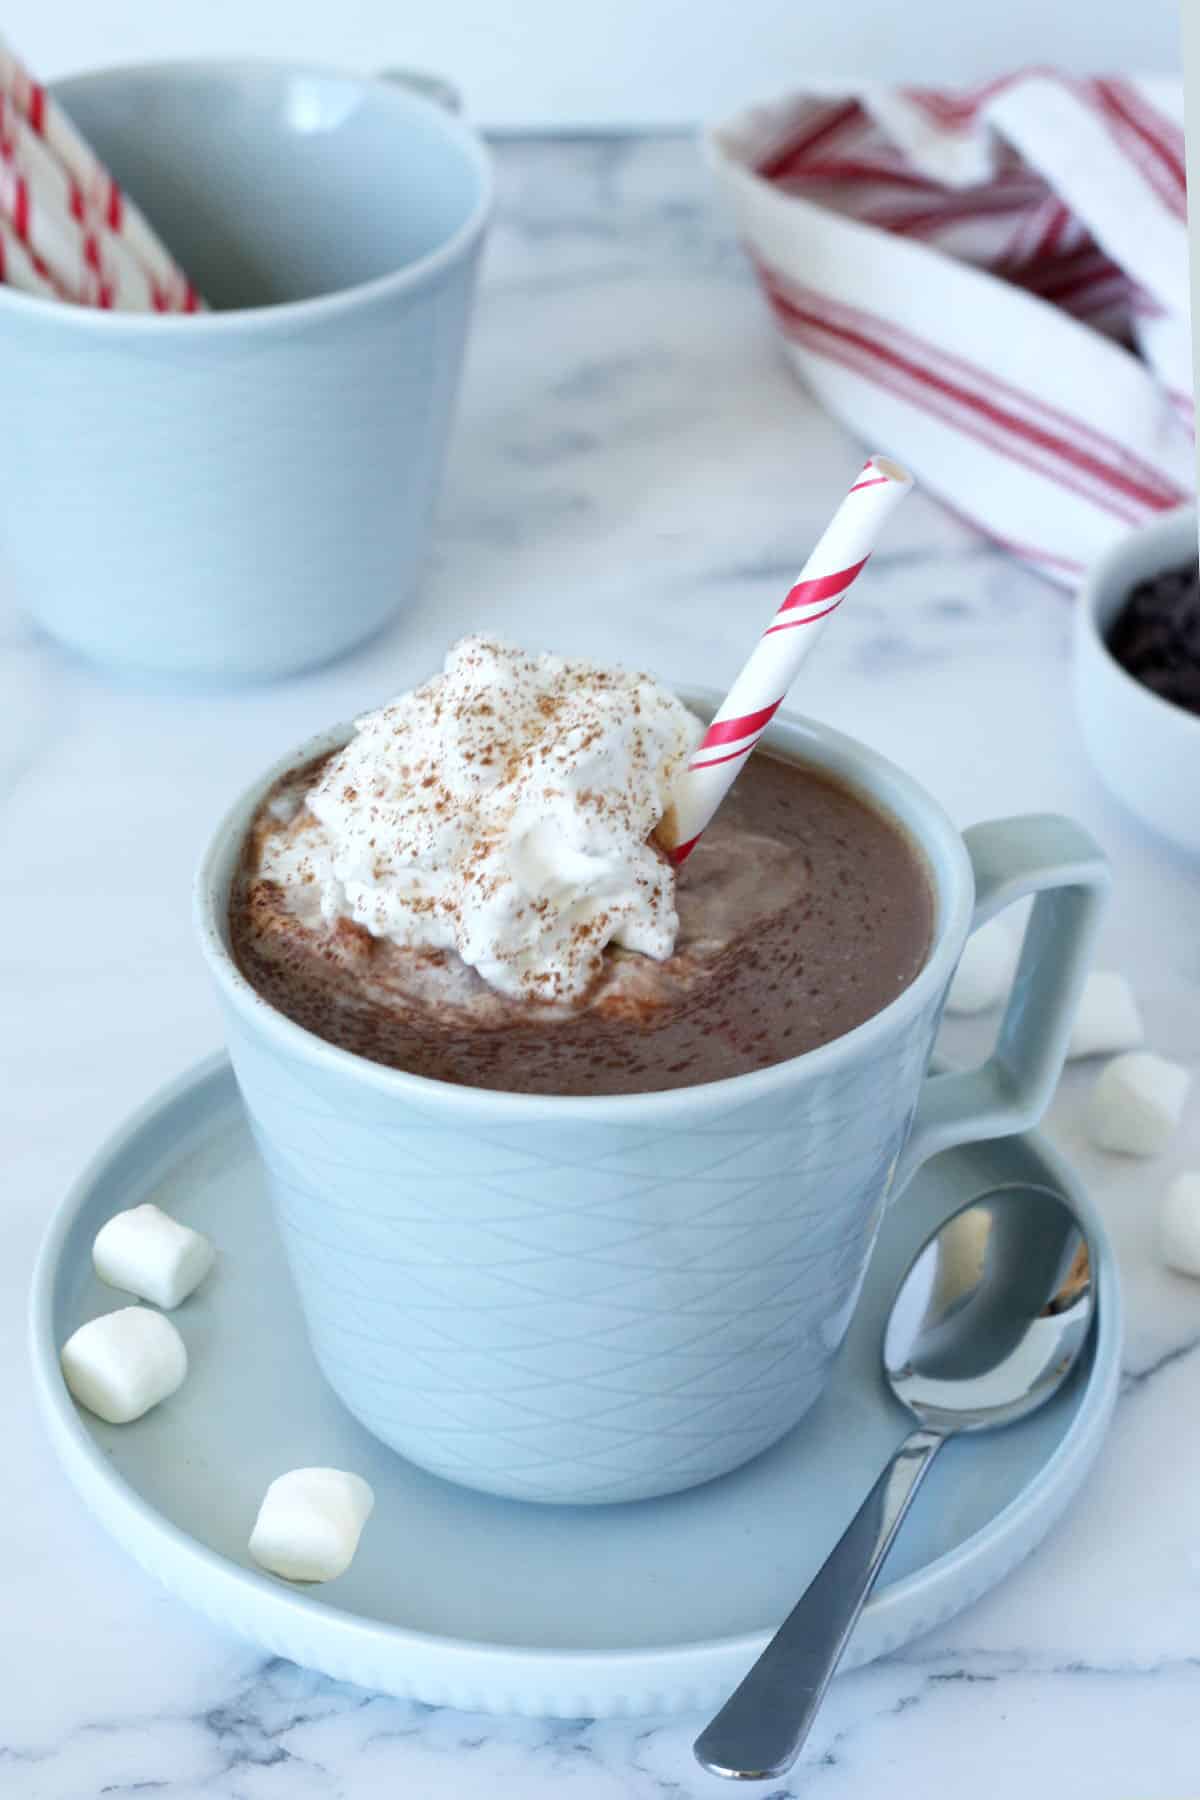 hot chocolate in a blue mug with whipped cream and a striped straw